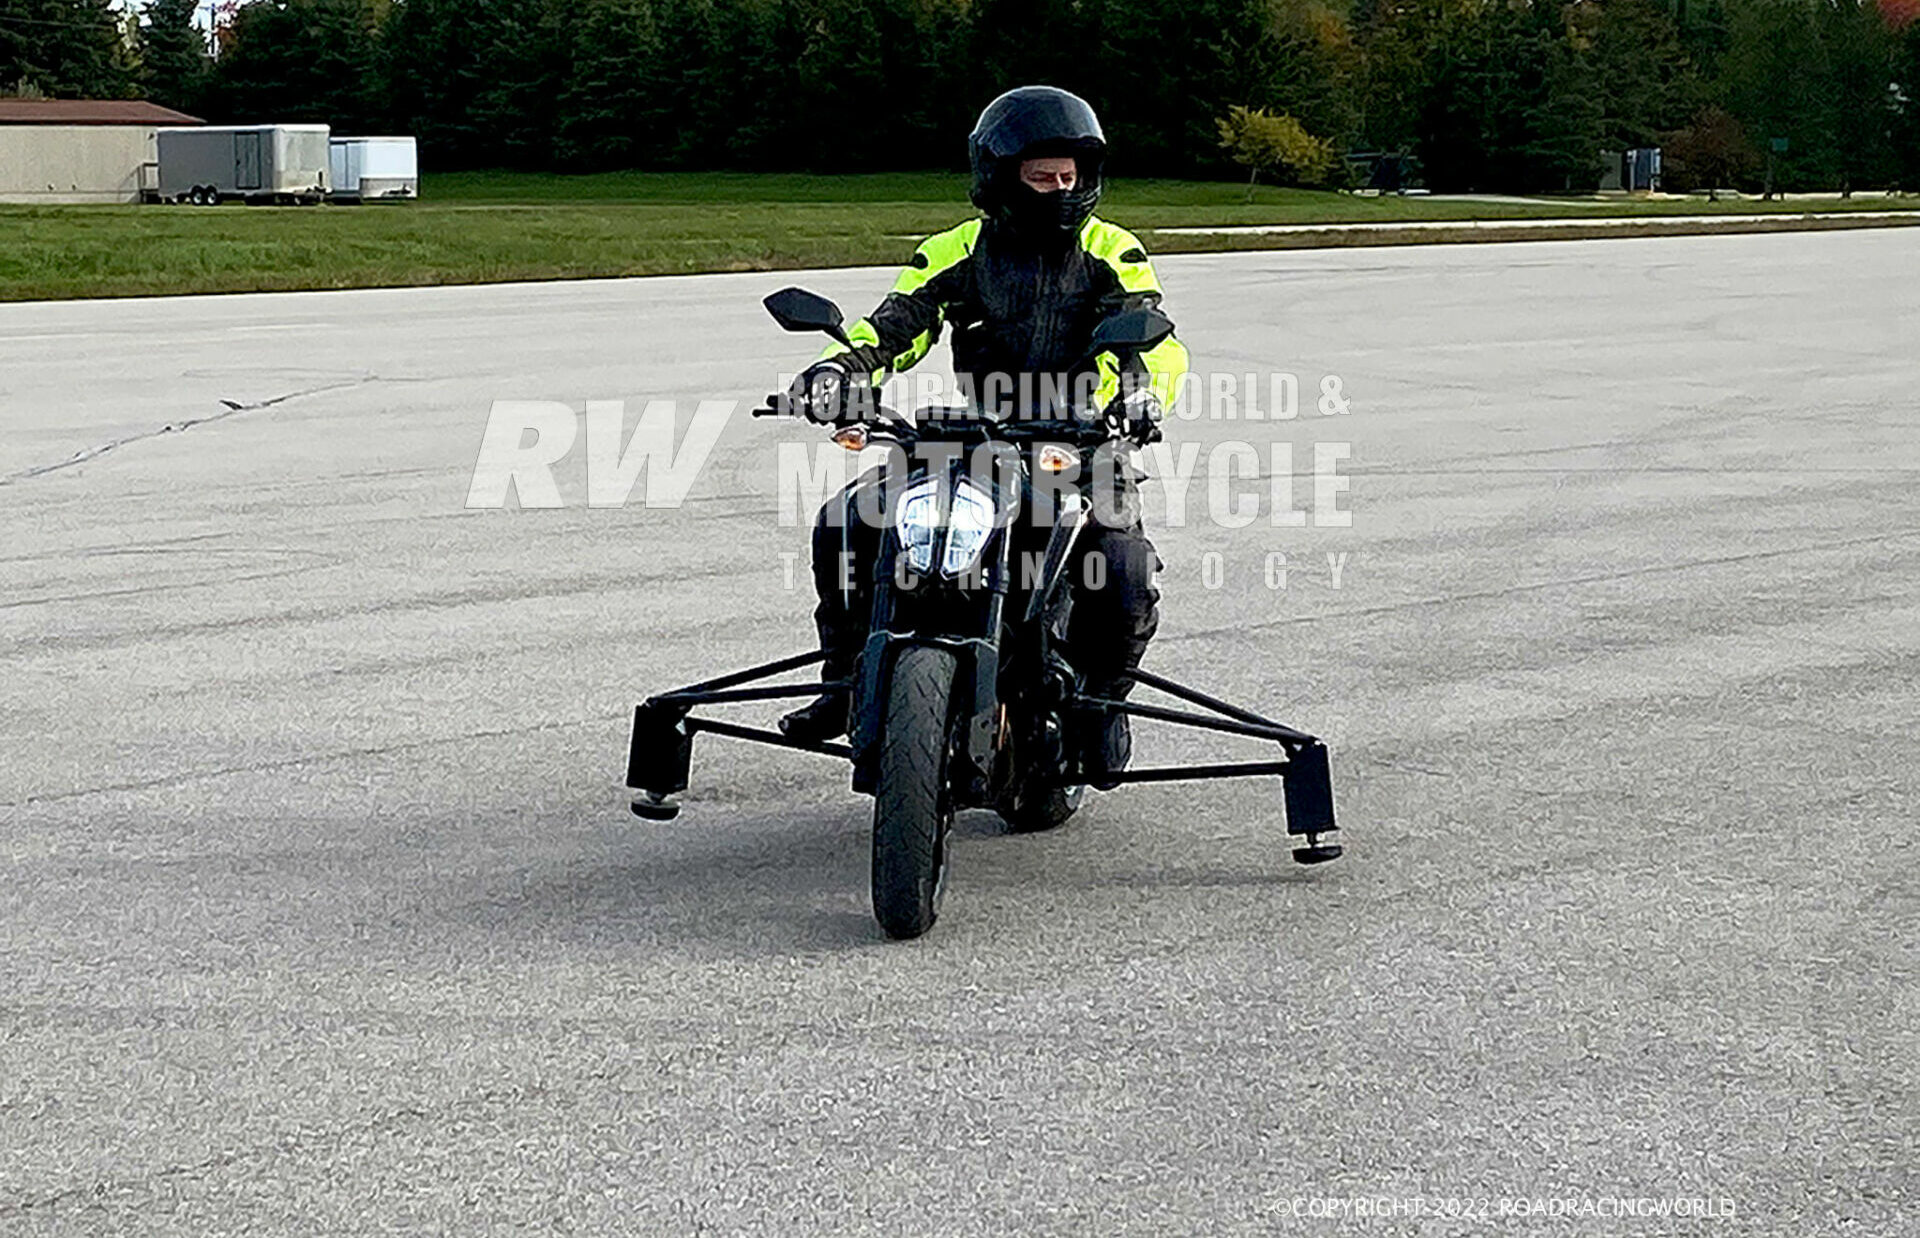 Continental Engineering Services (CES) Senior Test Engineer Nick Uselmann is a licensed WERA Expert racer. The bike seen here is fitted with rigid outriggers for use during straight-line brake testing.